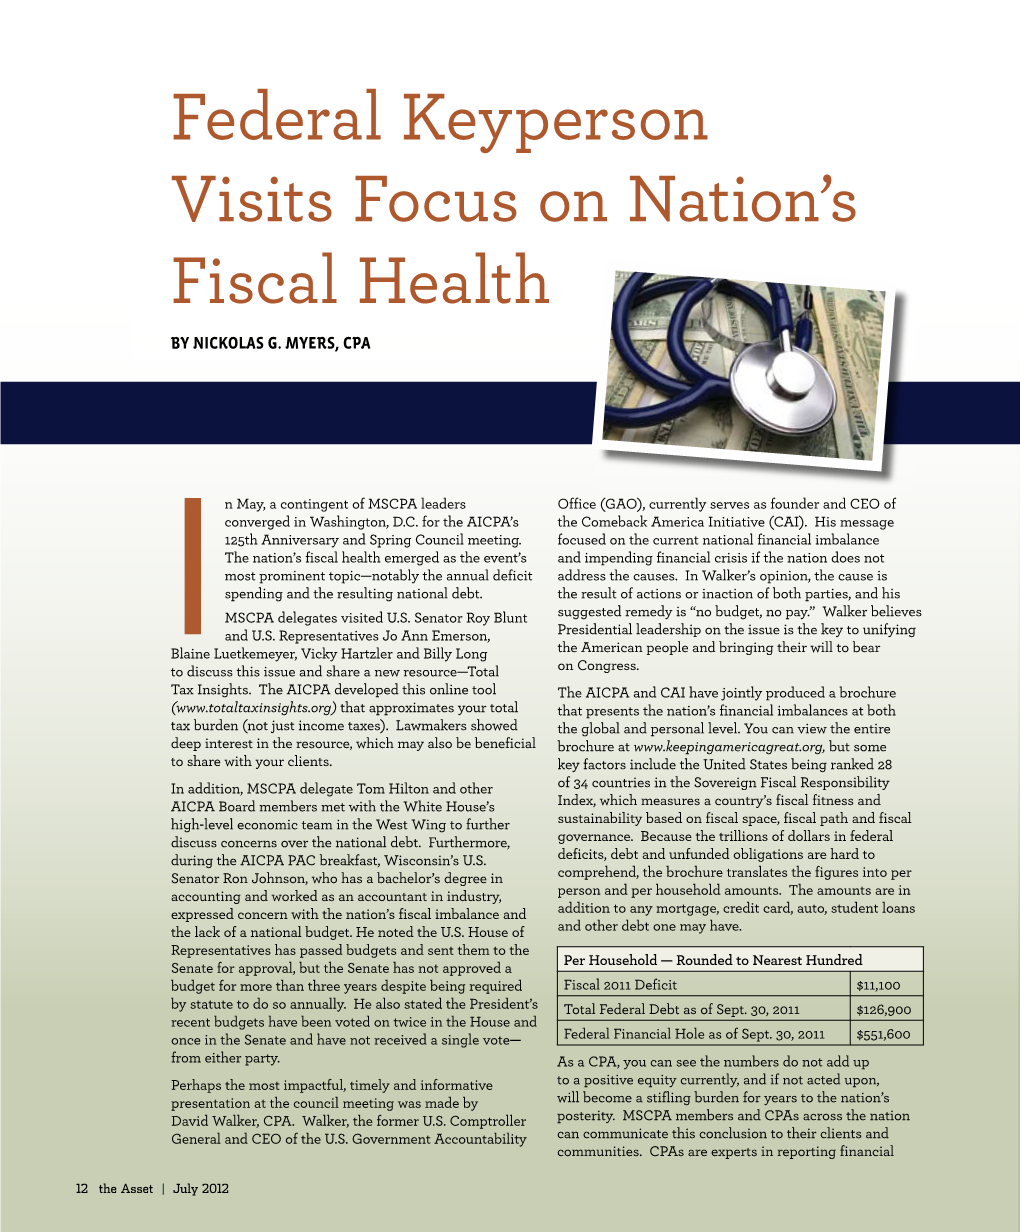 Federal Keyperson Visits Focus on Nation's Fiscal Health